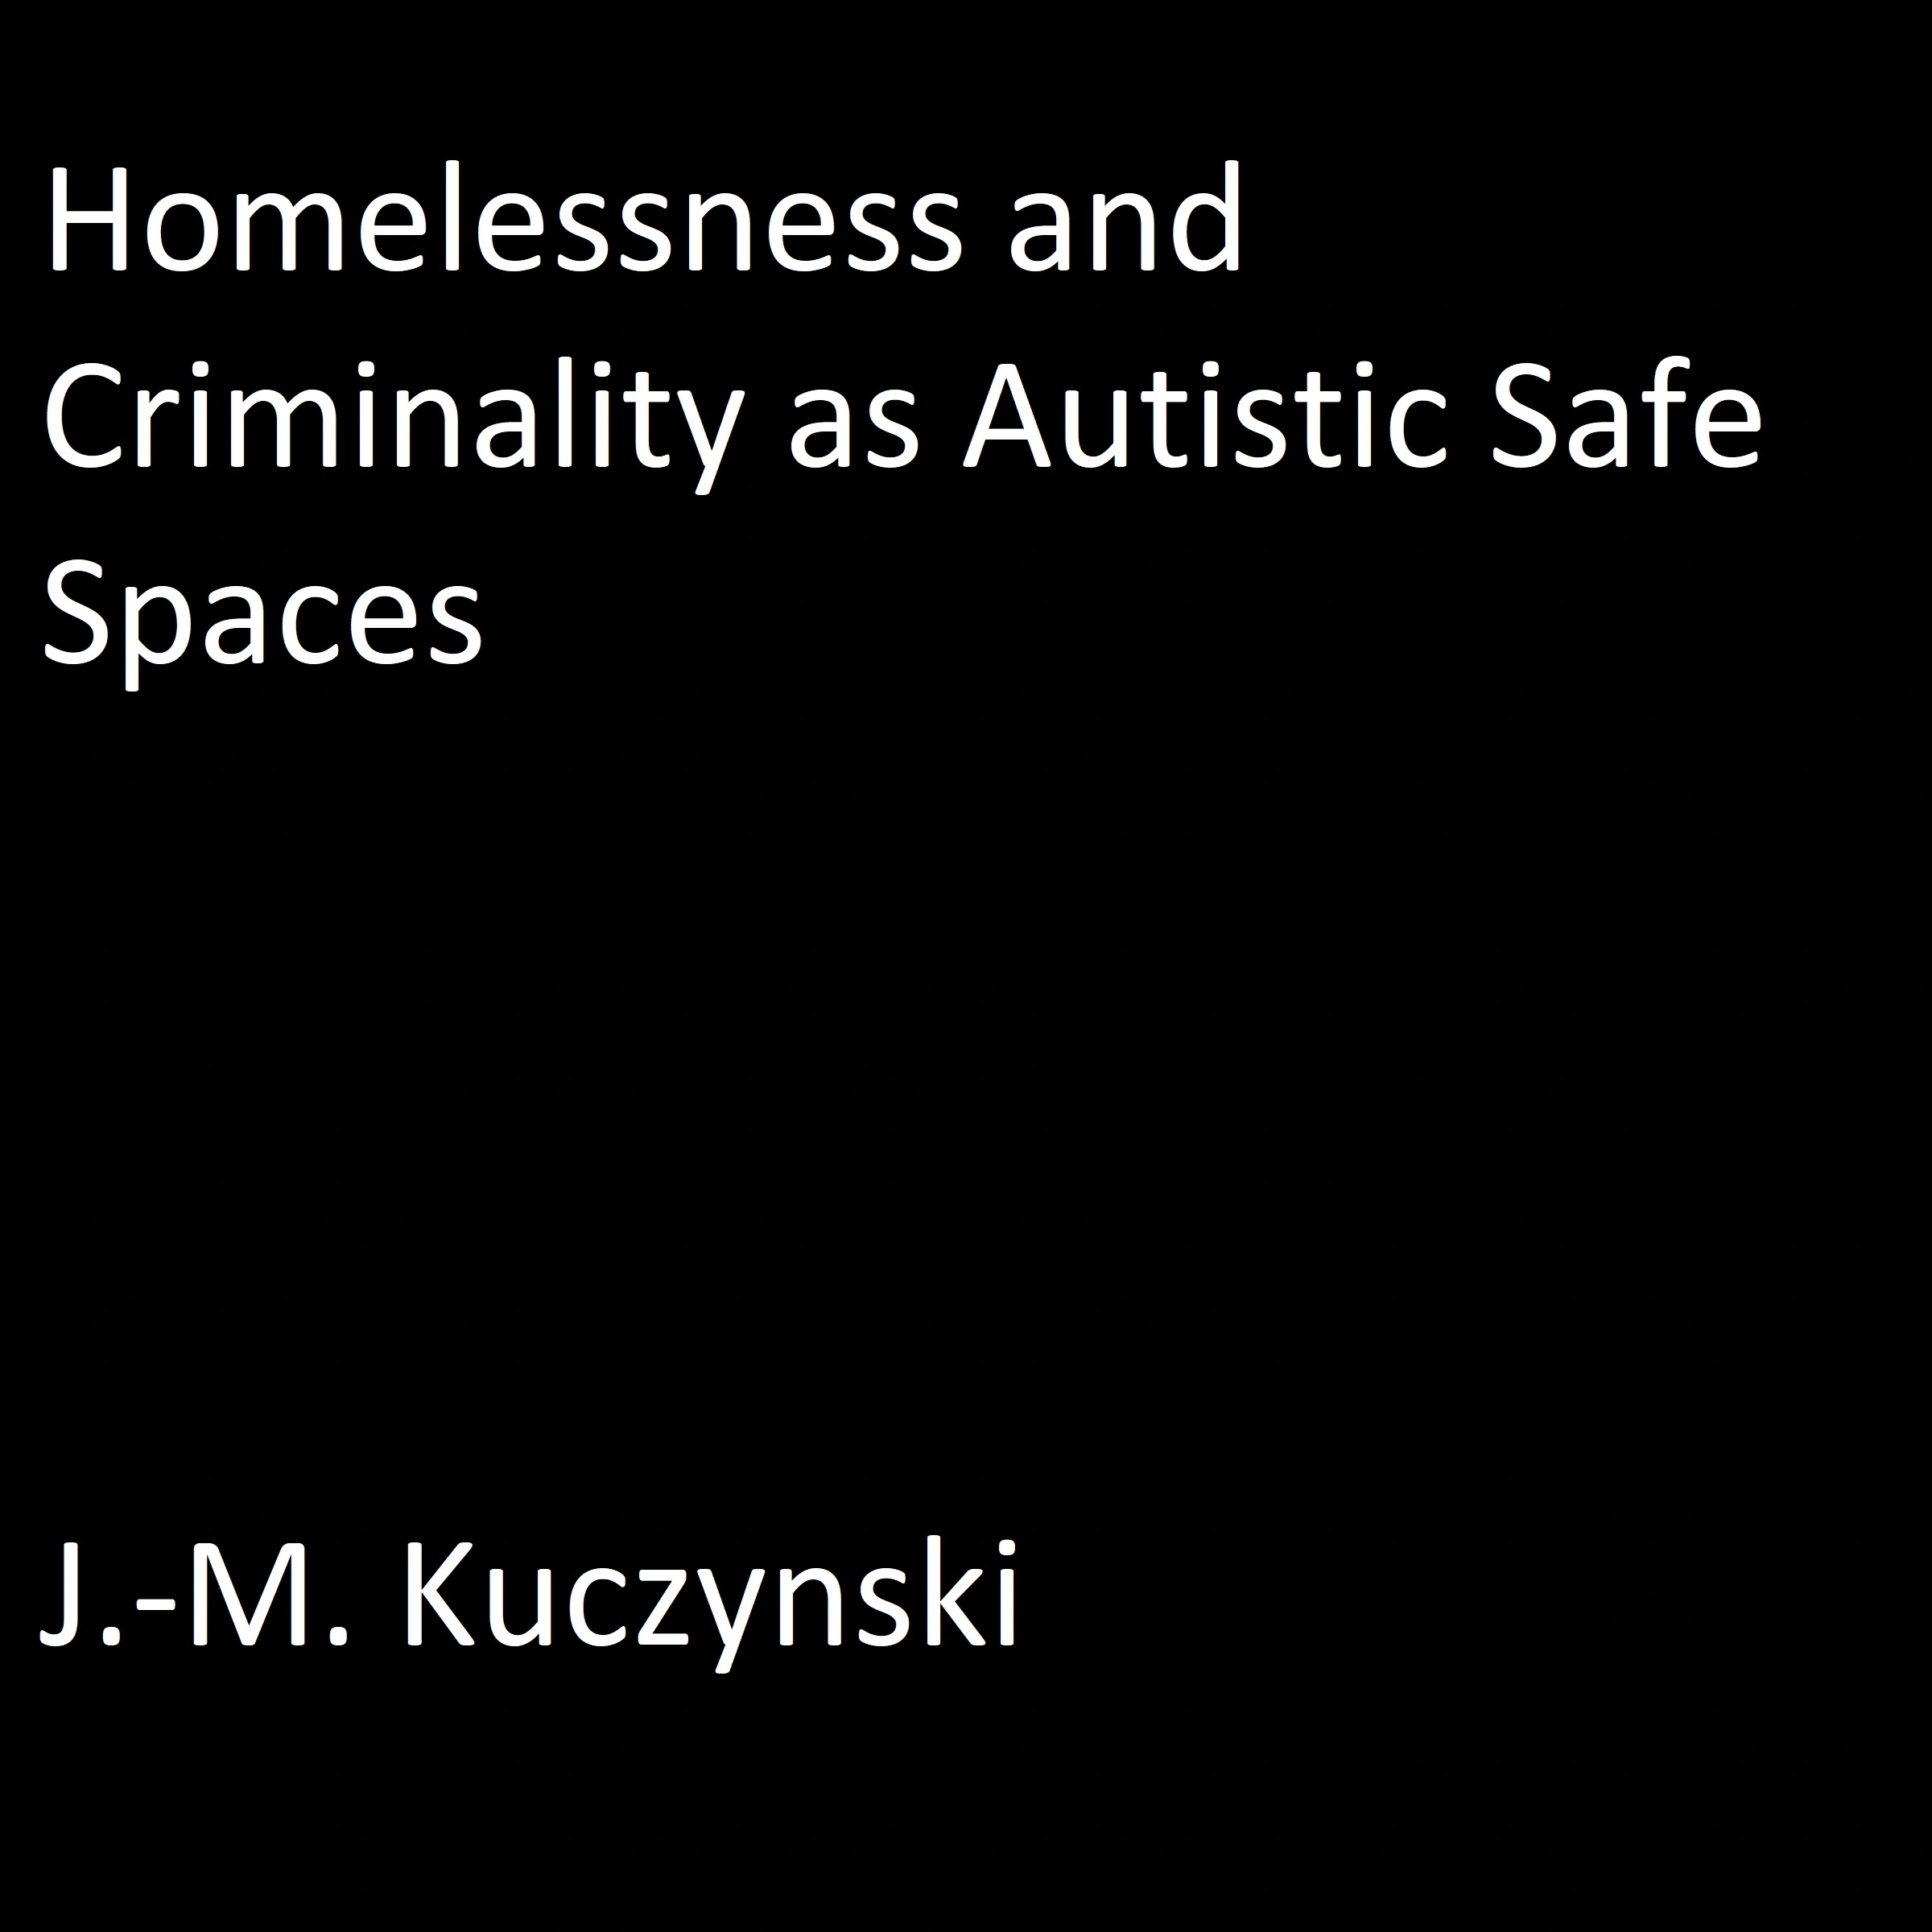 Homelessness and Criminality as Autistic Safe Spaces Audiobook by J.-M. Kuczynski